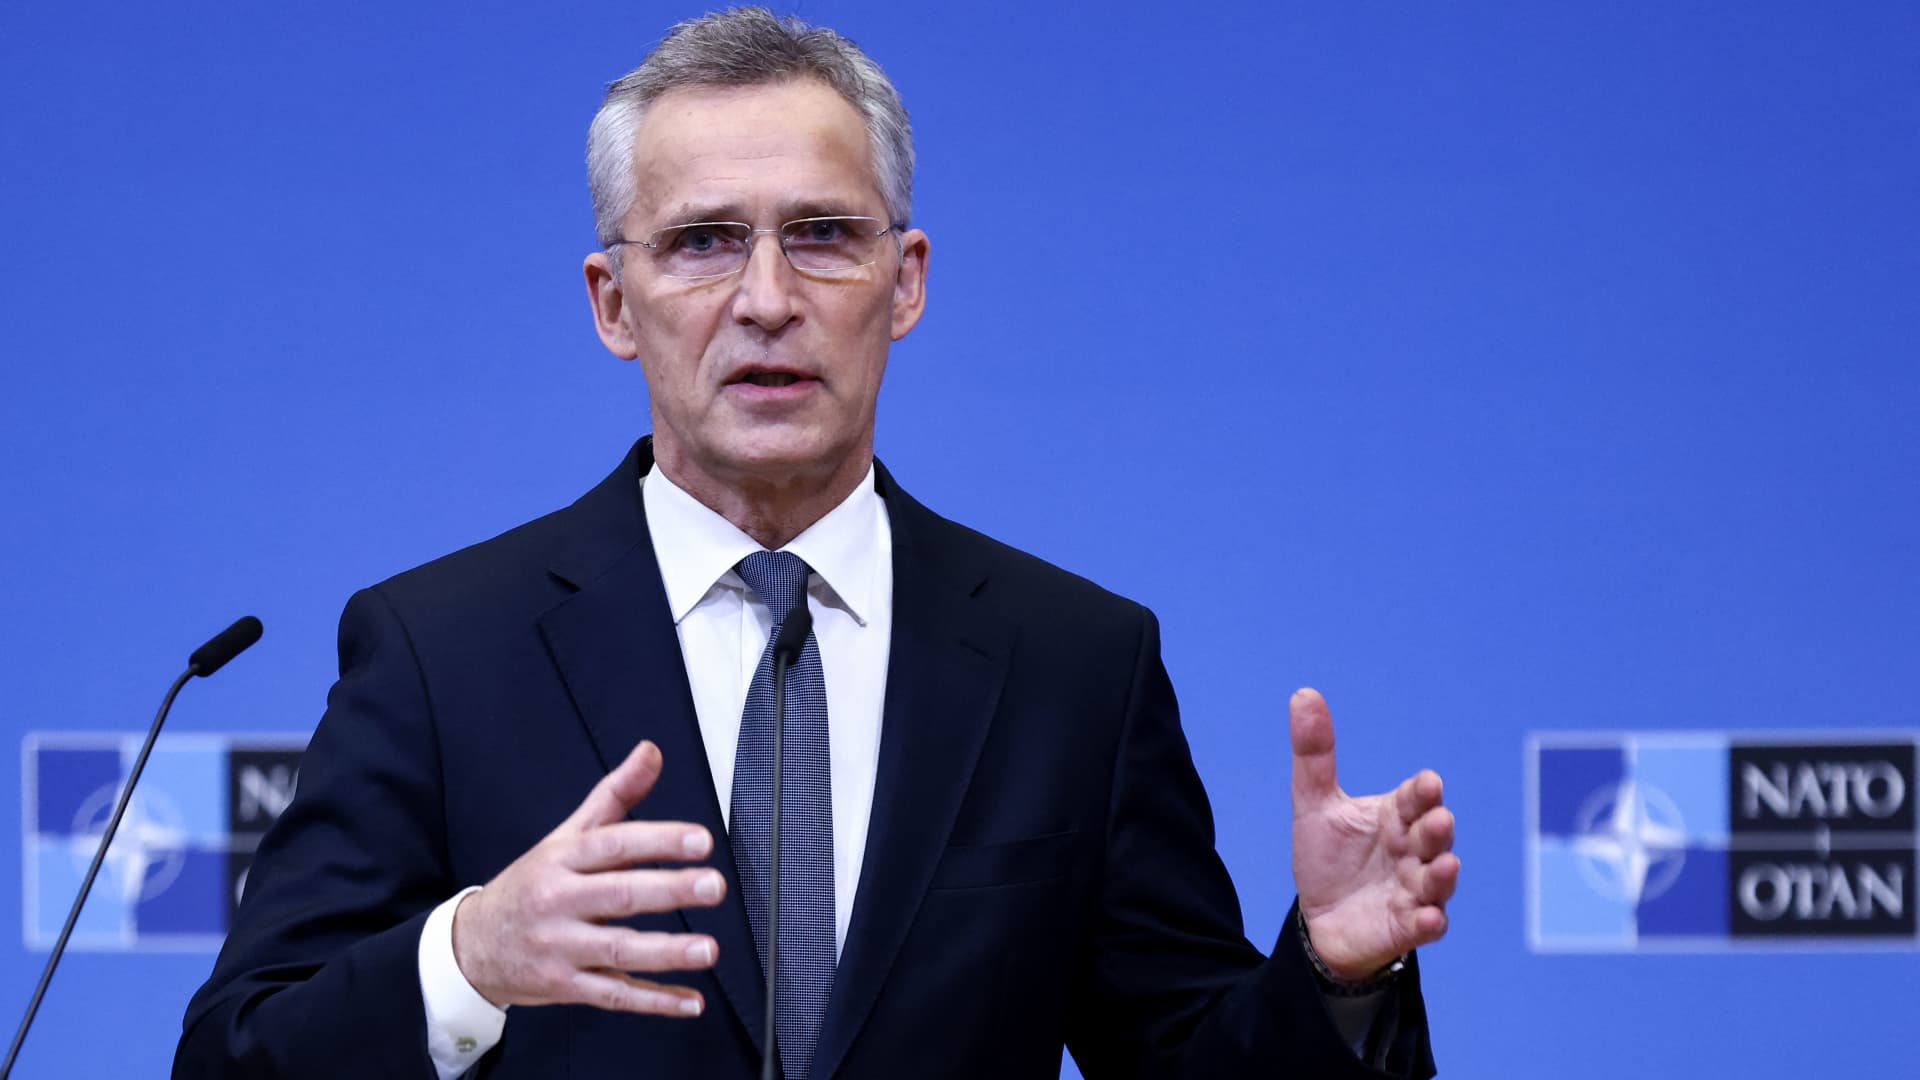 NATO Secretary General Jens Stoltenberg speaks during a press conference after a meeting of the alliance's Defence Ministers at the NATO Headquarter in Brussels on March 16, 2022.